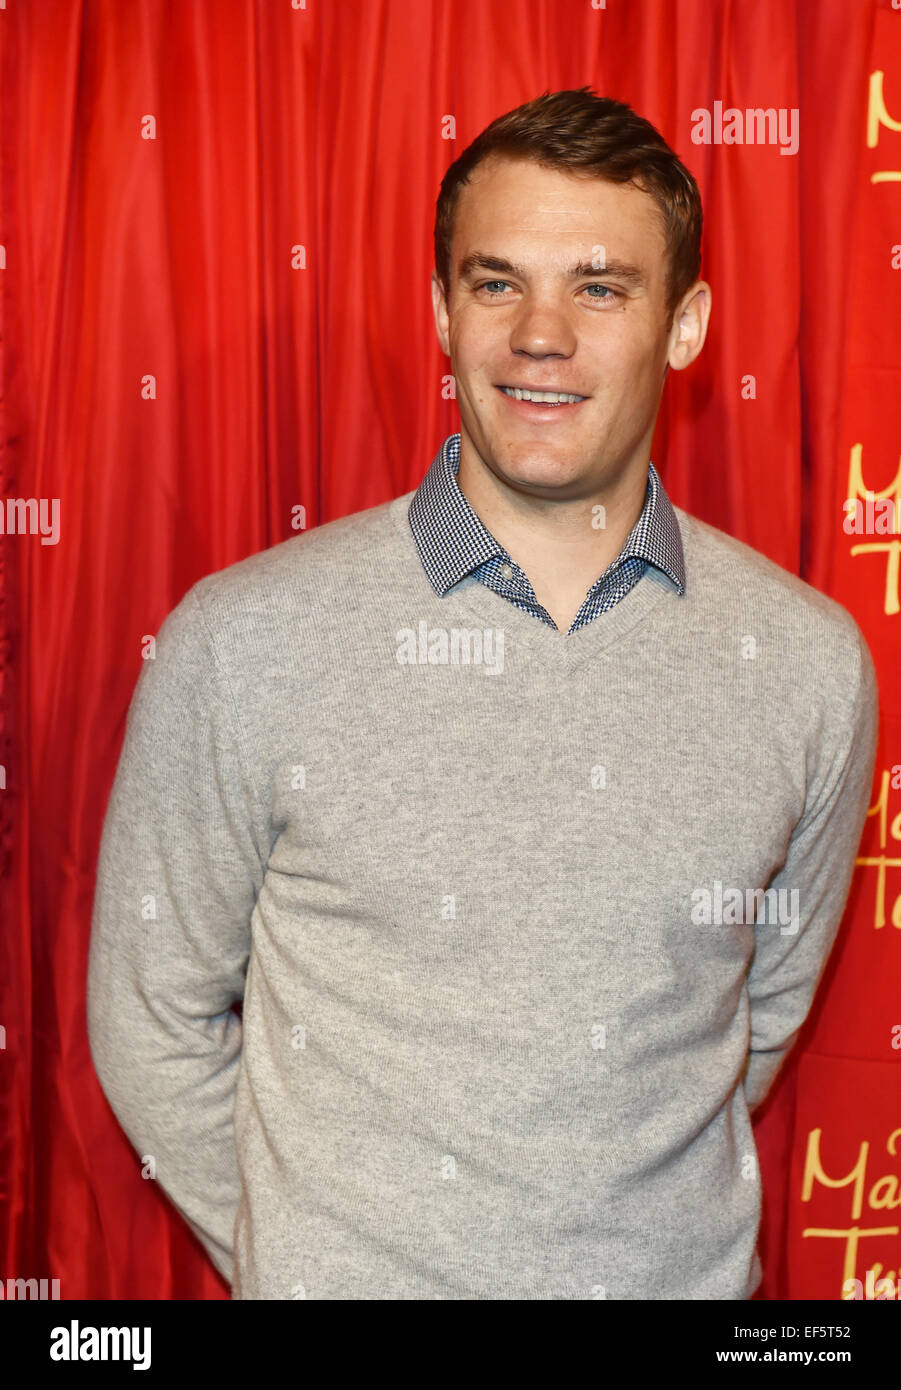 Berlin, Germany. 26th January, 2015. Manuel Neuer, goalkeeper for the national soccer team, poses next to his wax figure (not pictured) at Madame Tussauds in Berlin, Germany, 26 January 2015. It cost 200,000 Euros to make the figure, which can be seen in the sport section of the wax museum starting Tuesday, 27 January 2015. Photo: JENS KALAENE/dpa/ Alamy Live News Stock Photo